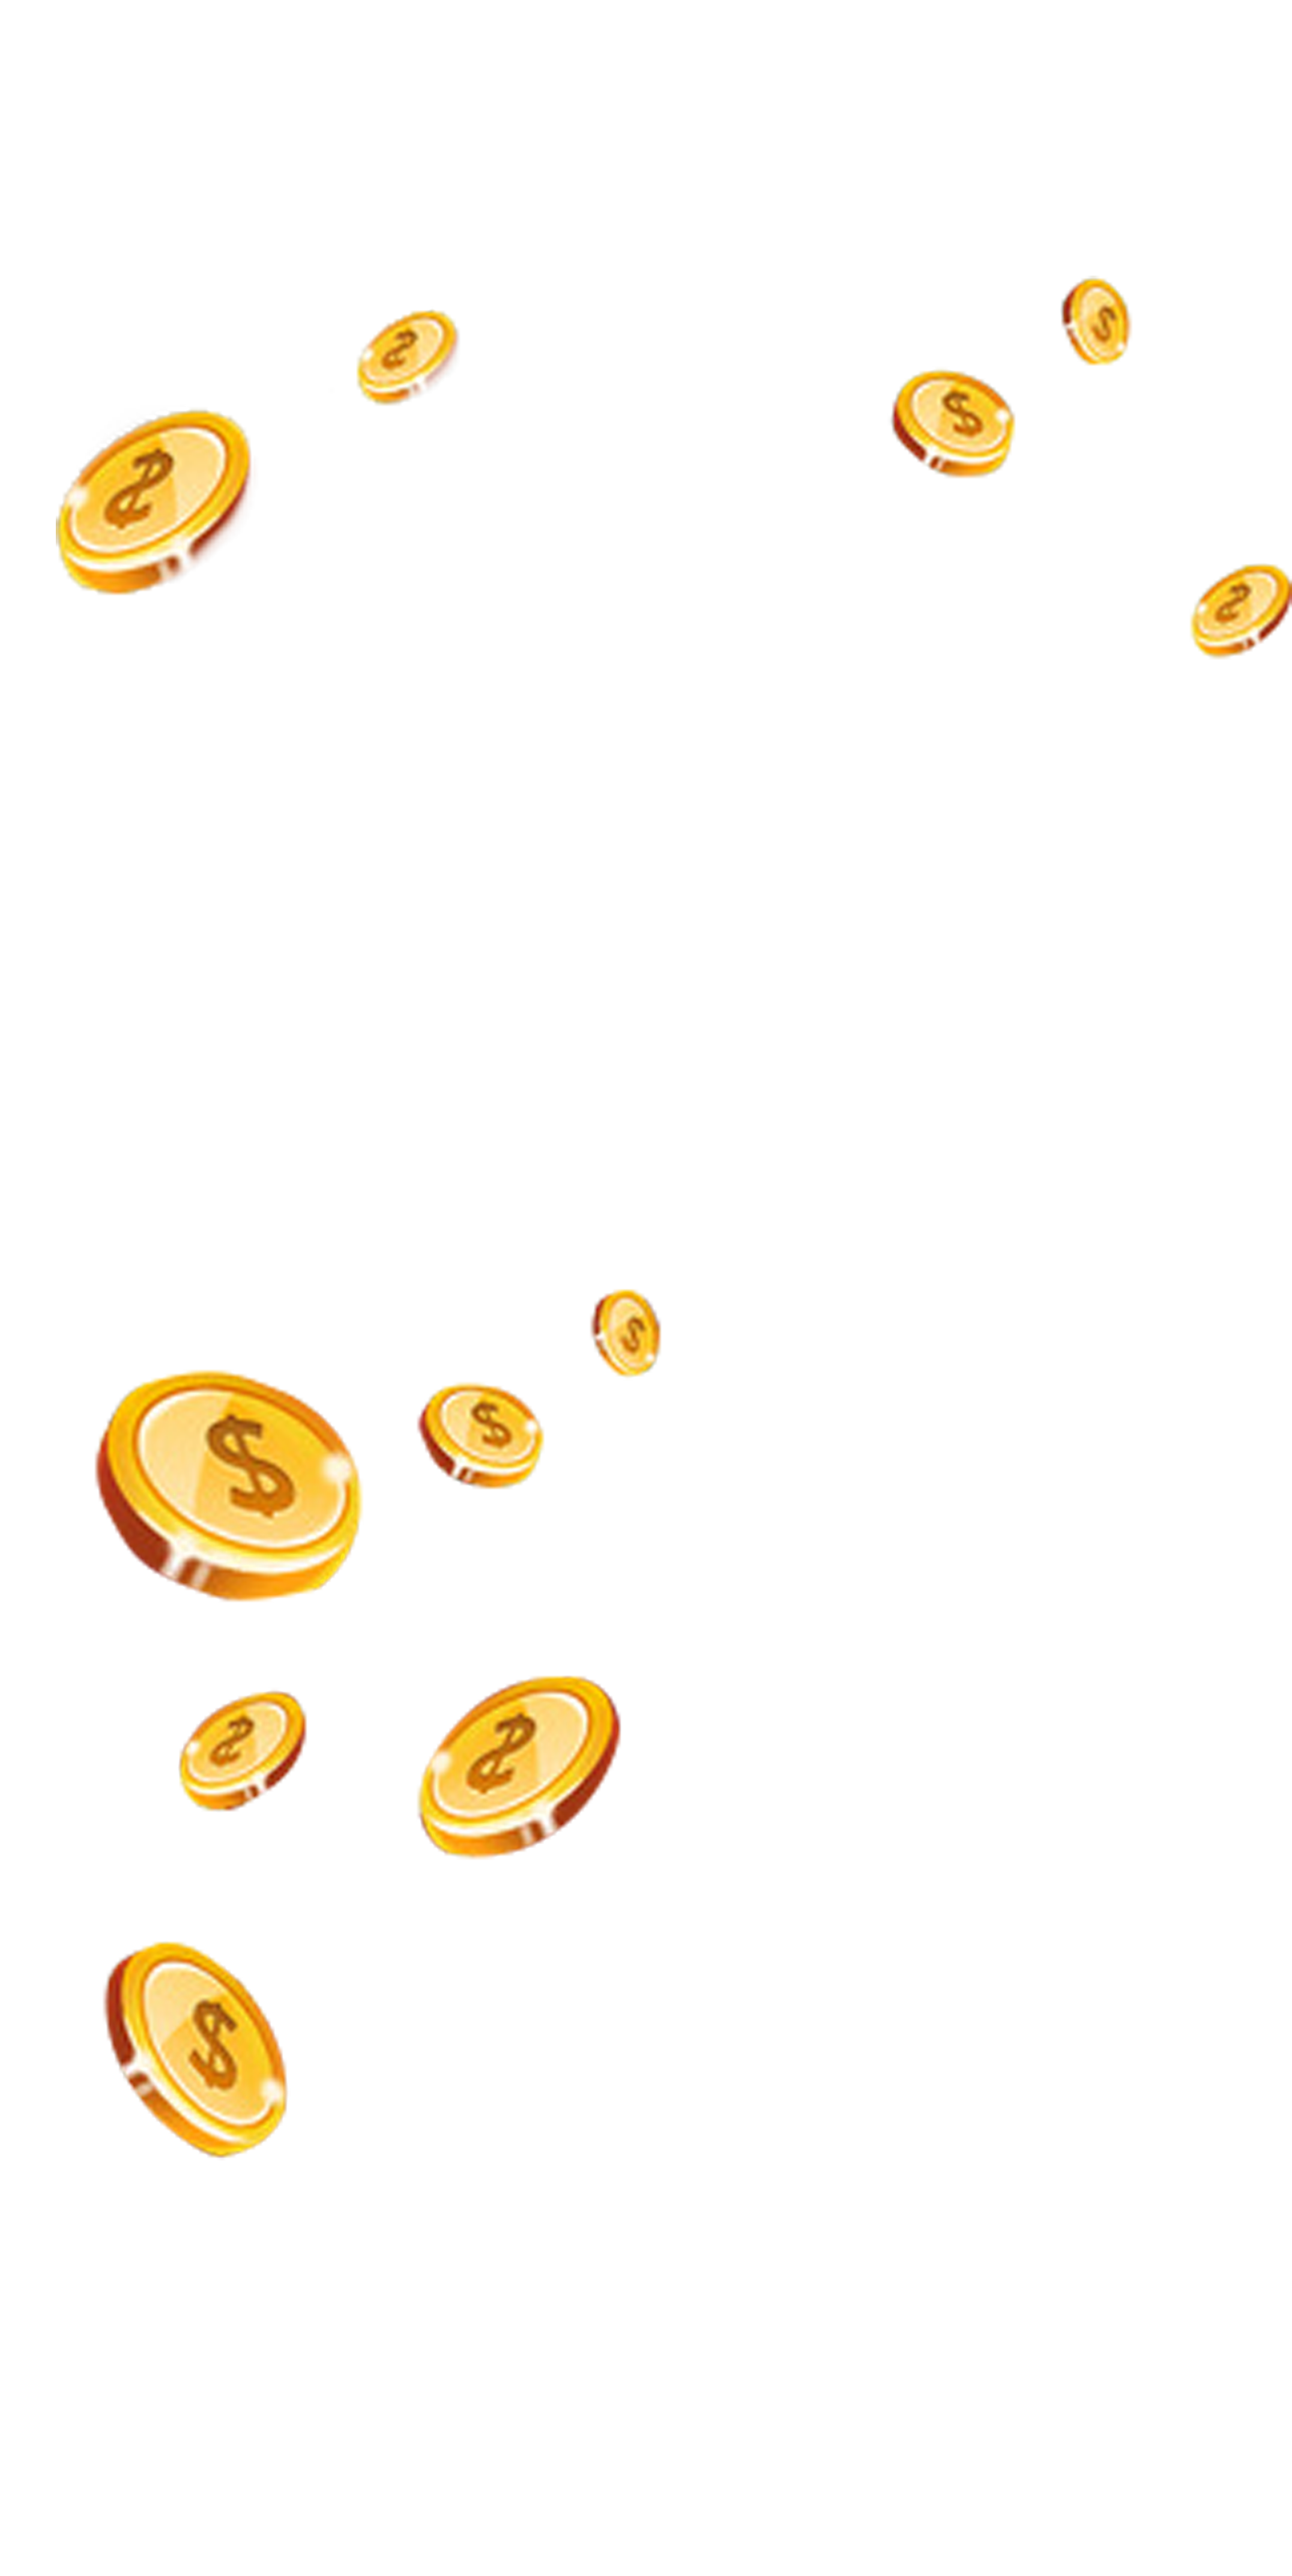 Floating Coin Gold Free Download Image PNG Image